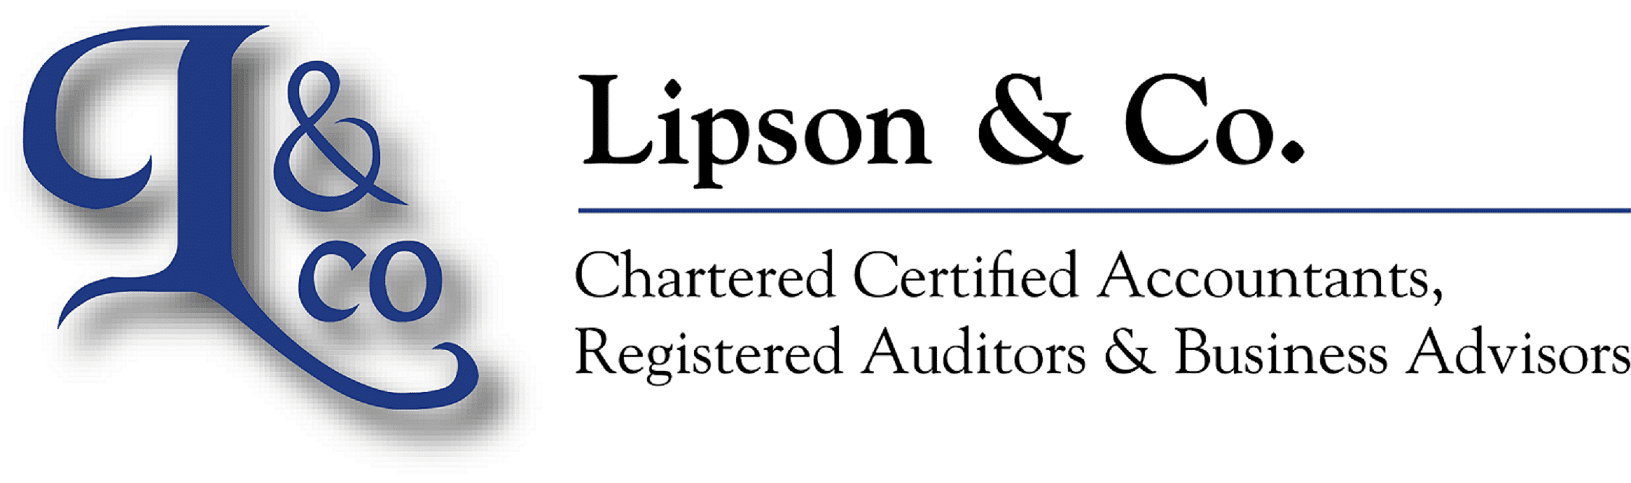 Lipson & Co. Chartered Certified Accountants